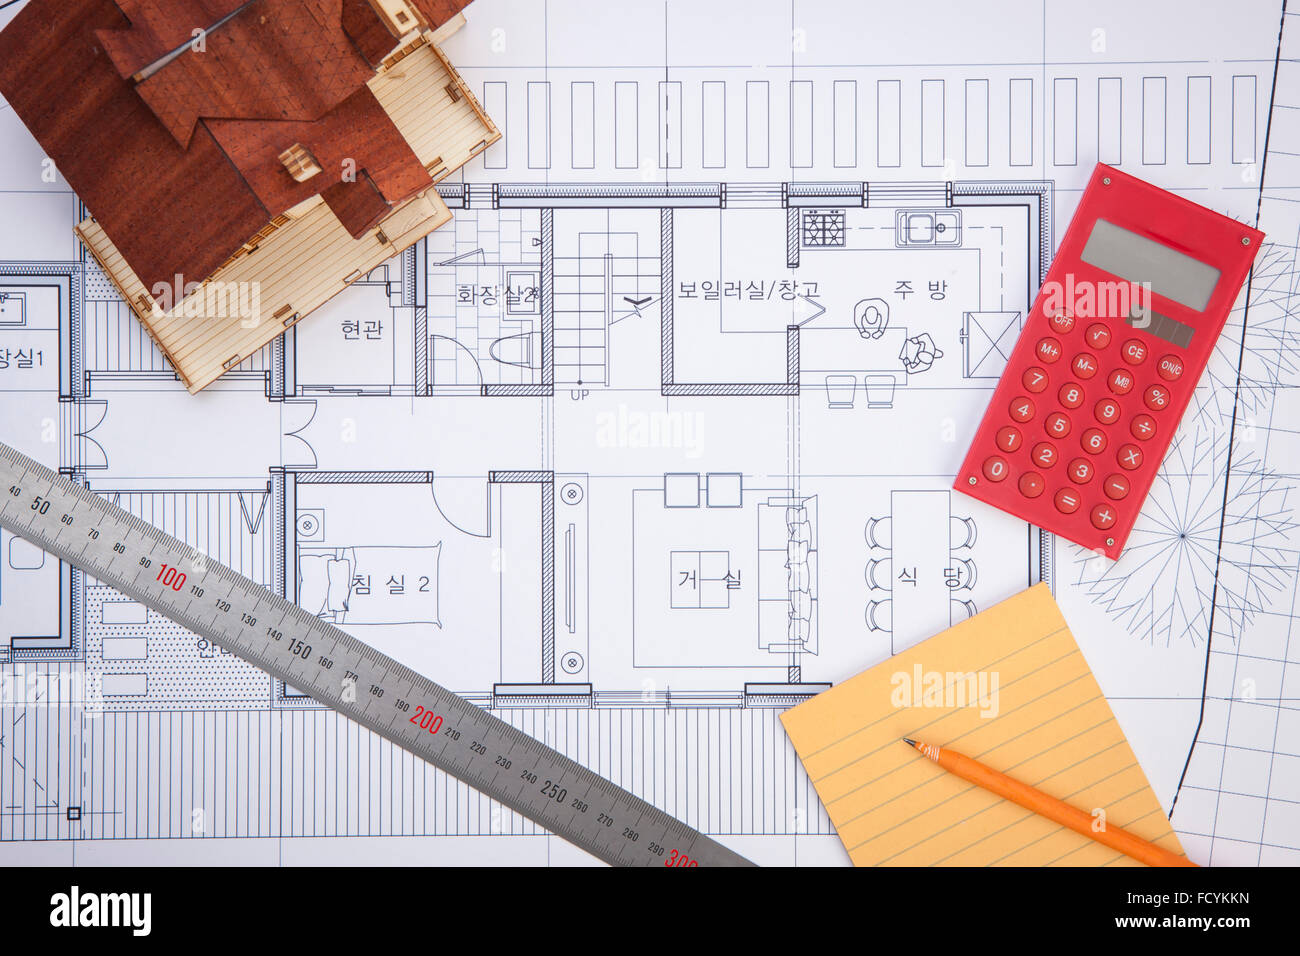 High angle of drafting and designing related objects with a miniature house on a blueprint Stock Photo